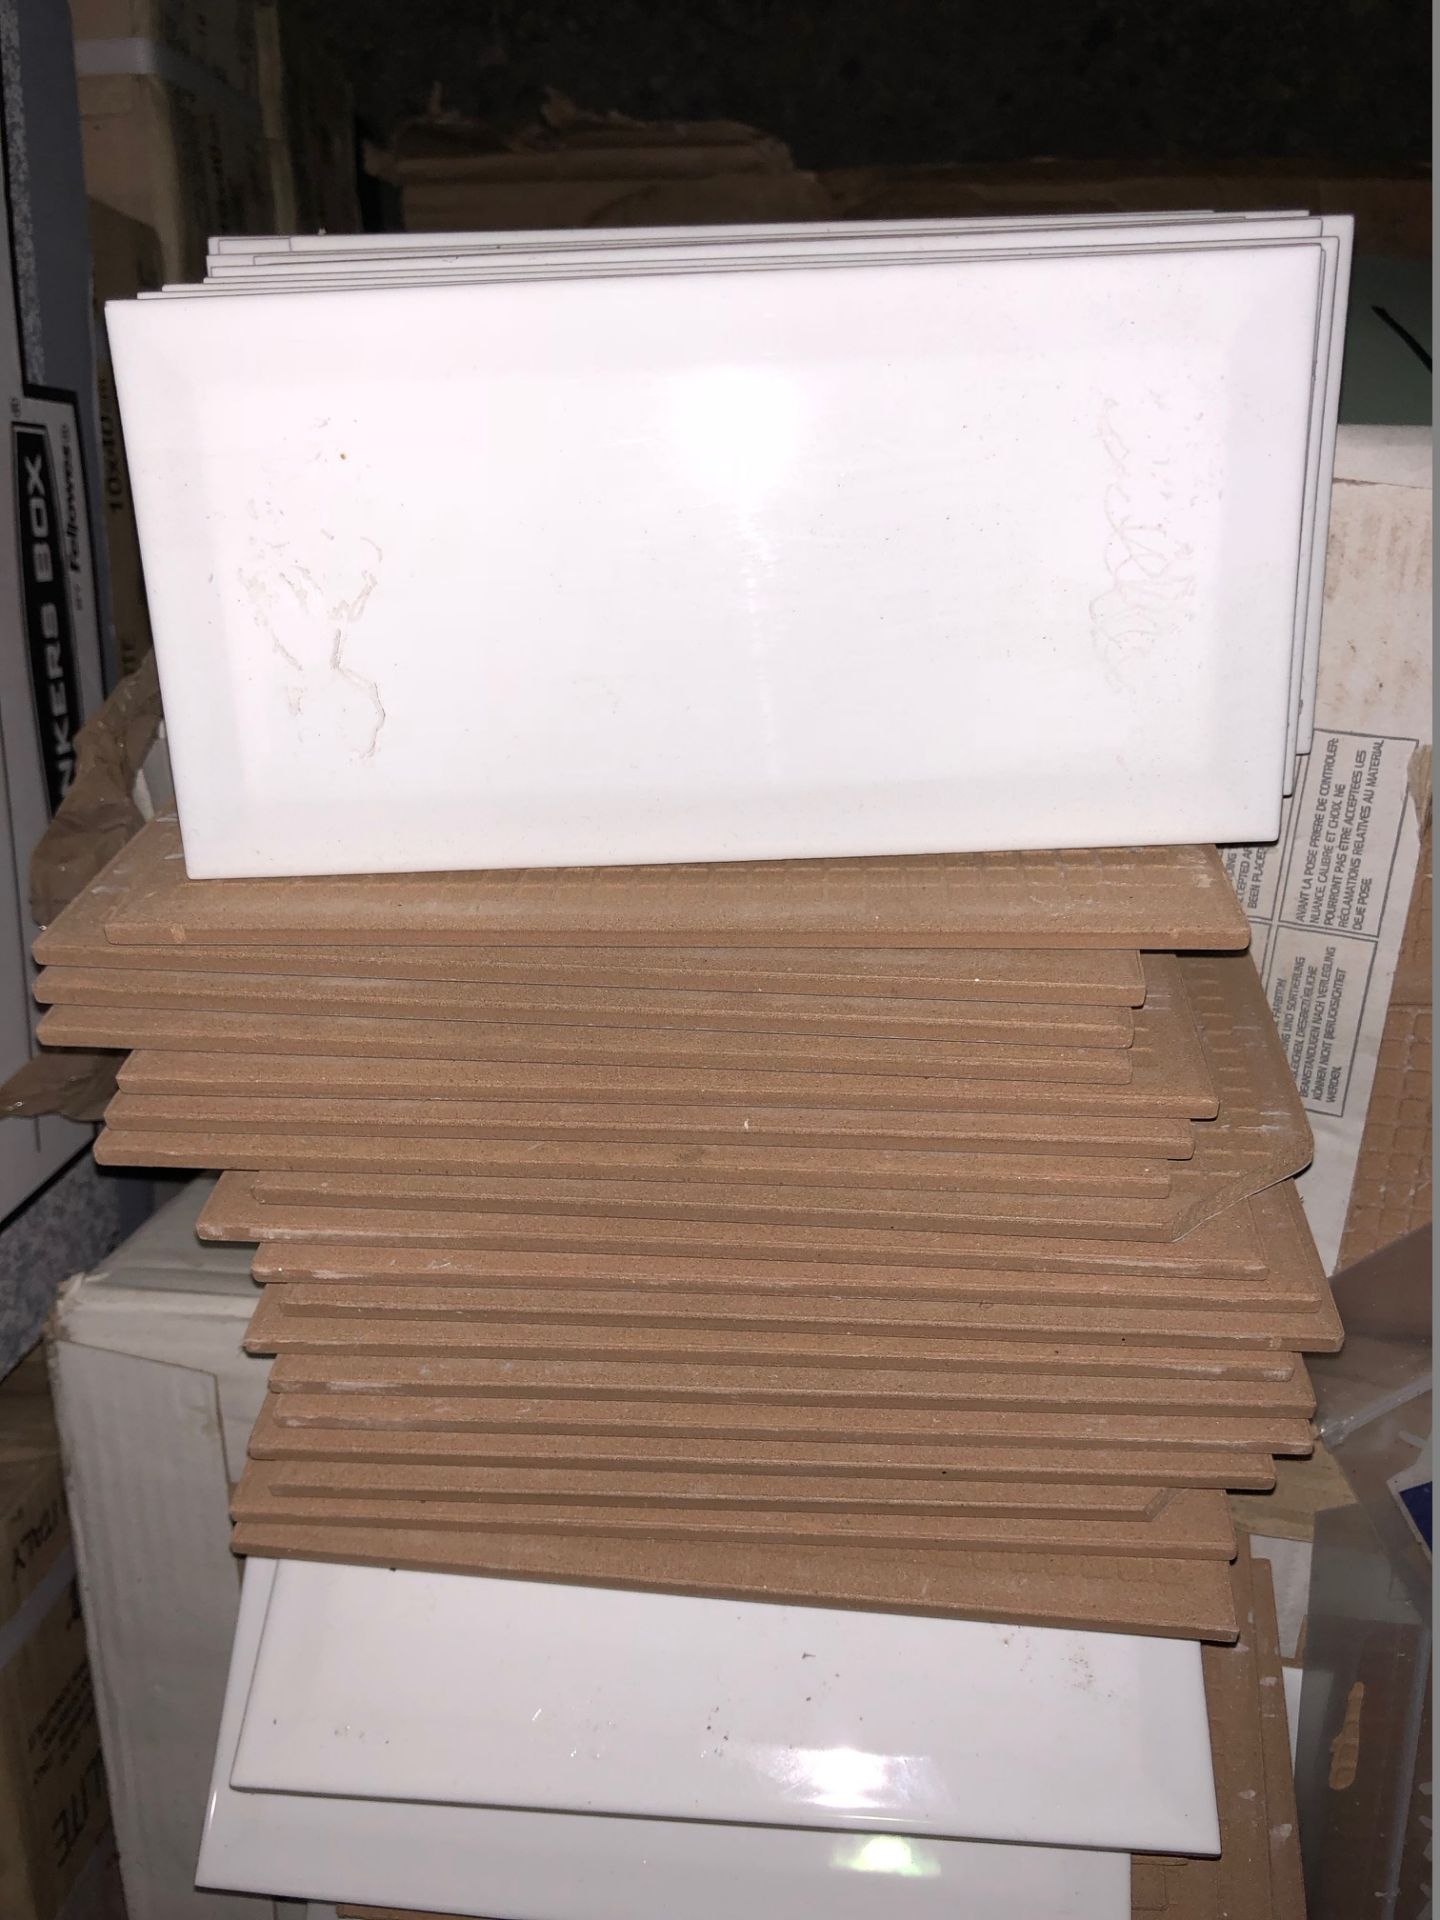 1 x Pallet of Mixed Wall Tiles (Approximately 40 Boxes in Total - Large Retail Value) - Image 2 of 4